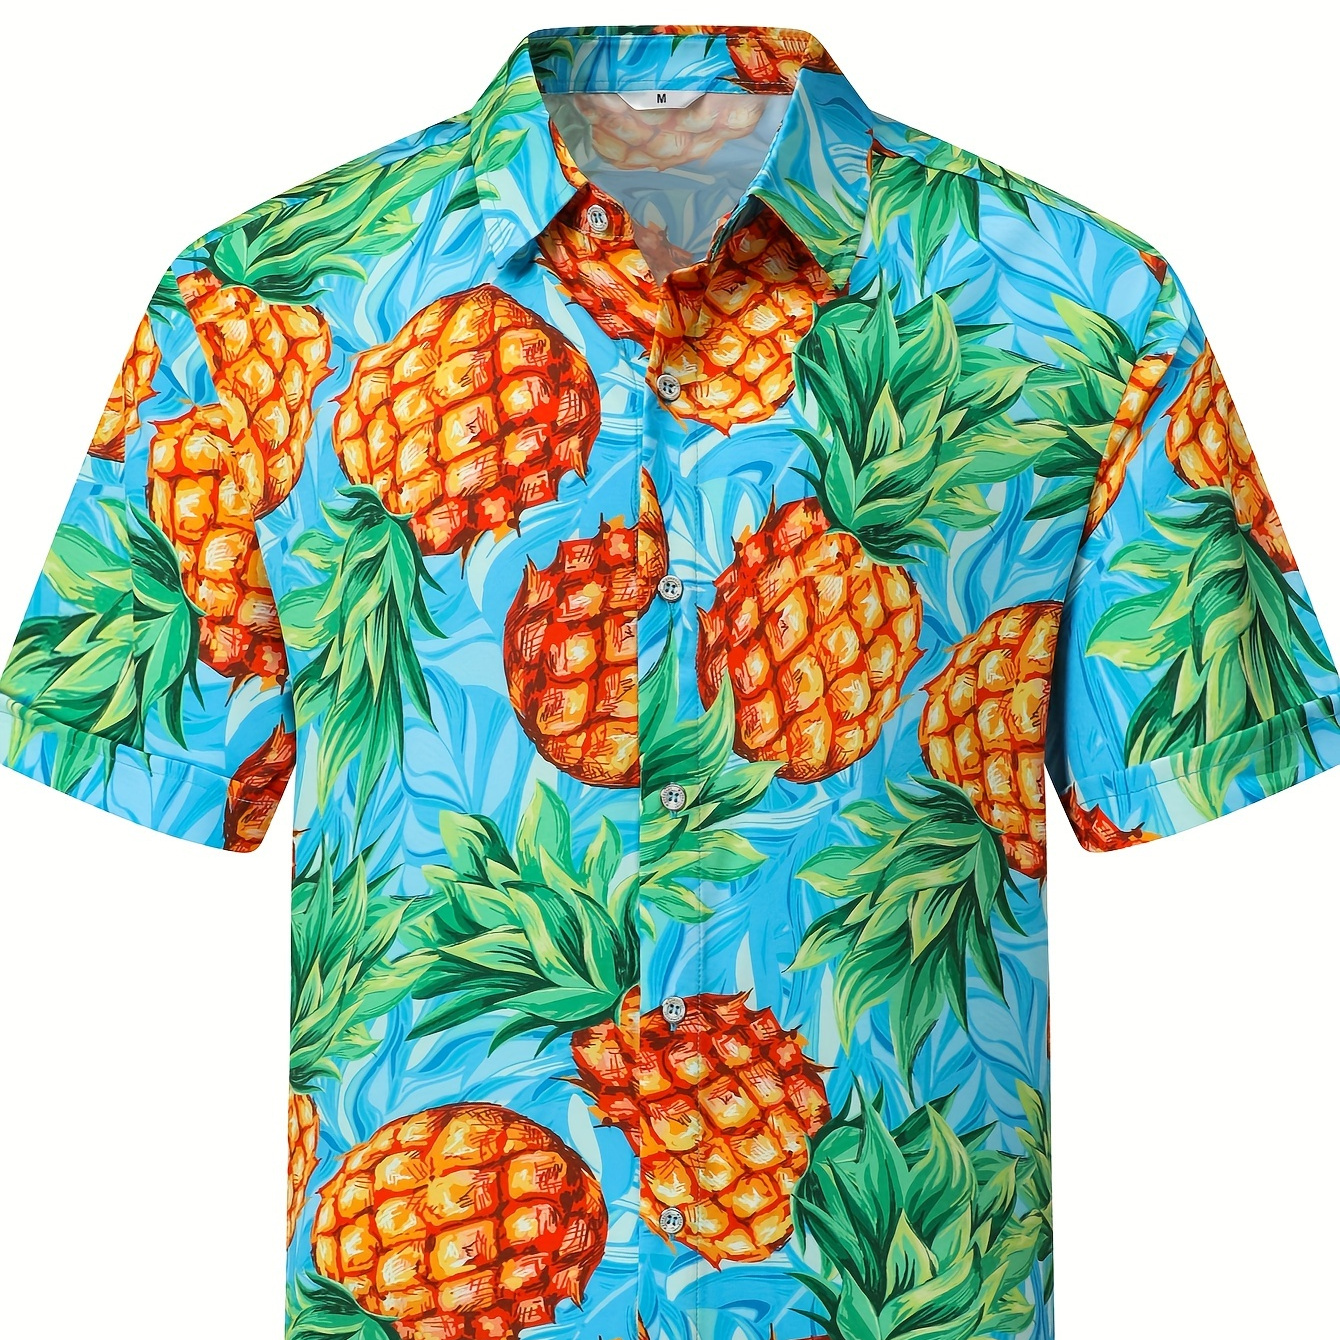 

Men's Trendy Colorful Pineapple Print Short Sleeve Button Up Lapel Shirt For Summer Daily, Perfect For Summer Beach Casual Vacation, Men's Hawaiian Shirt